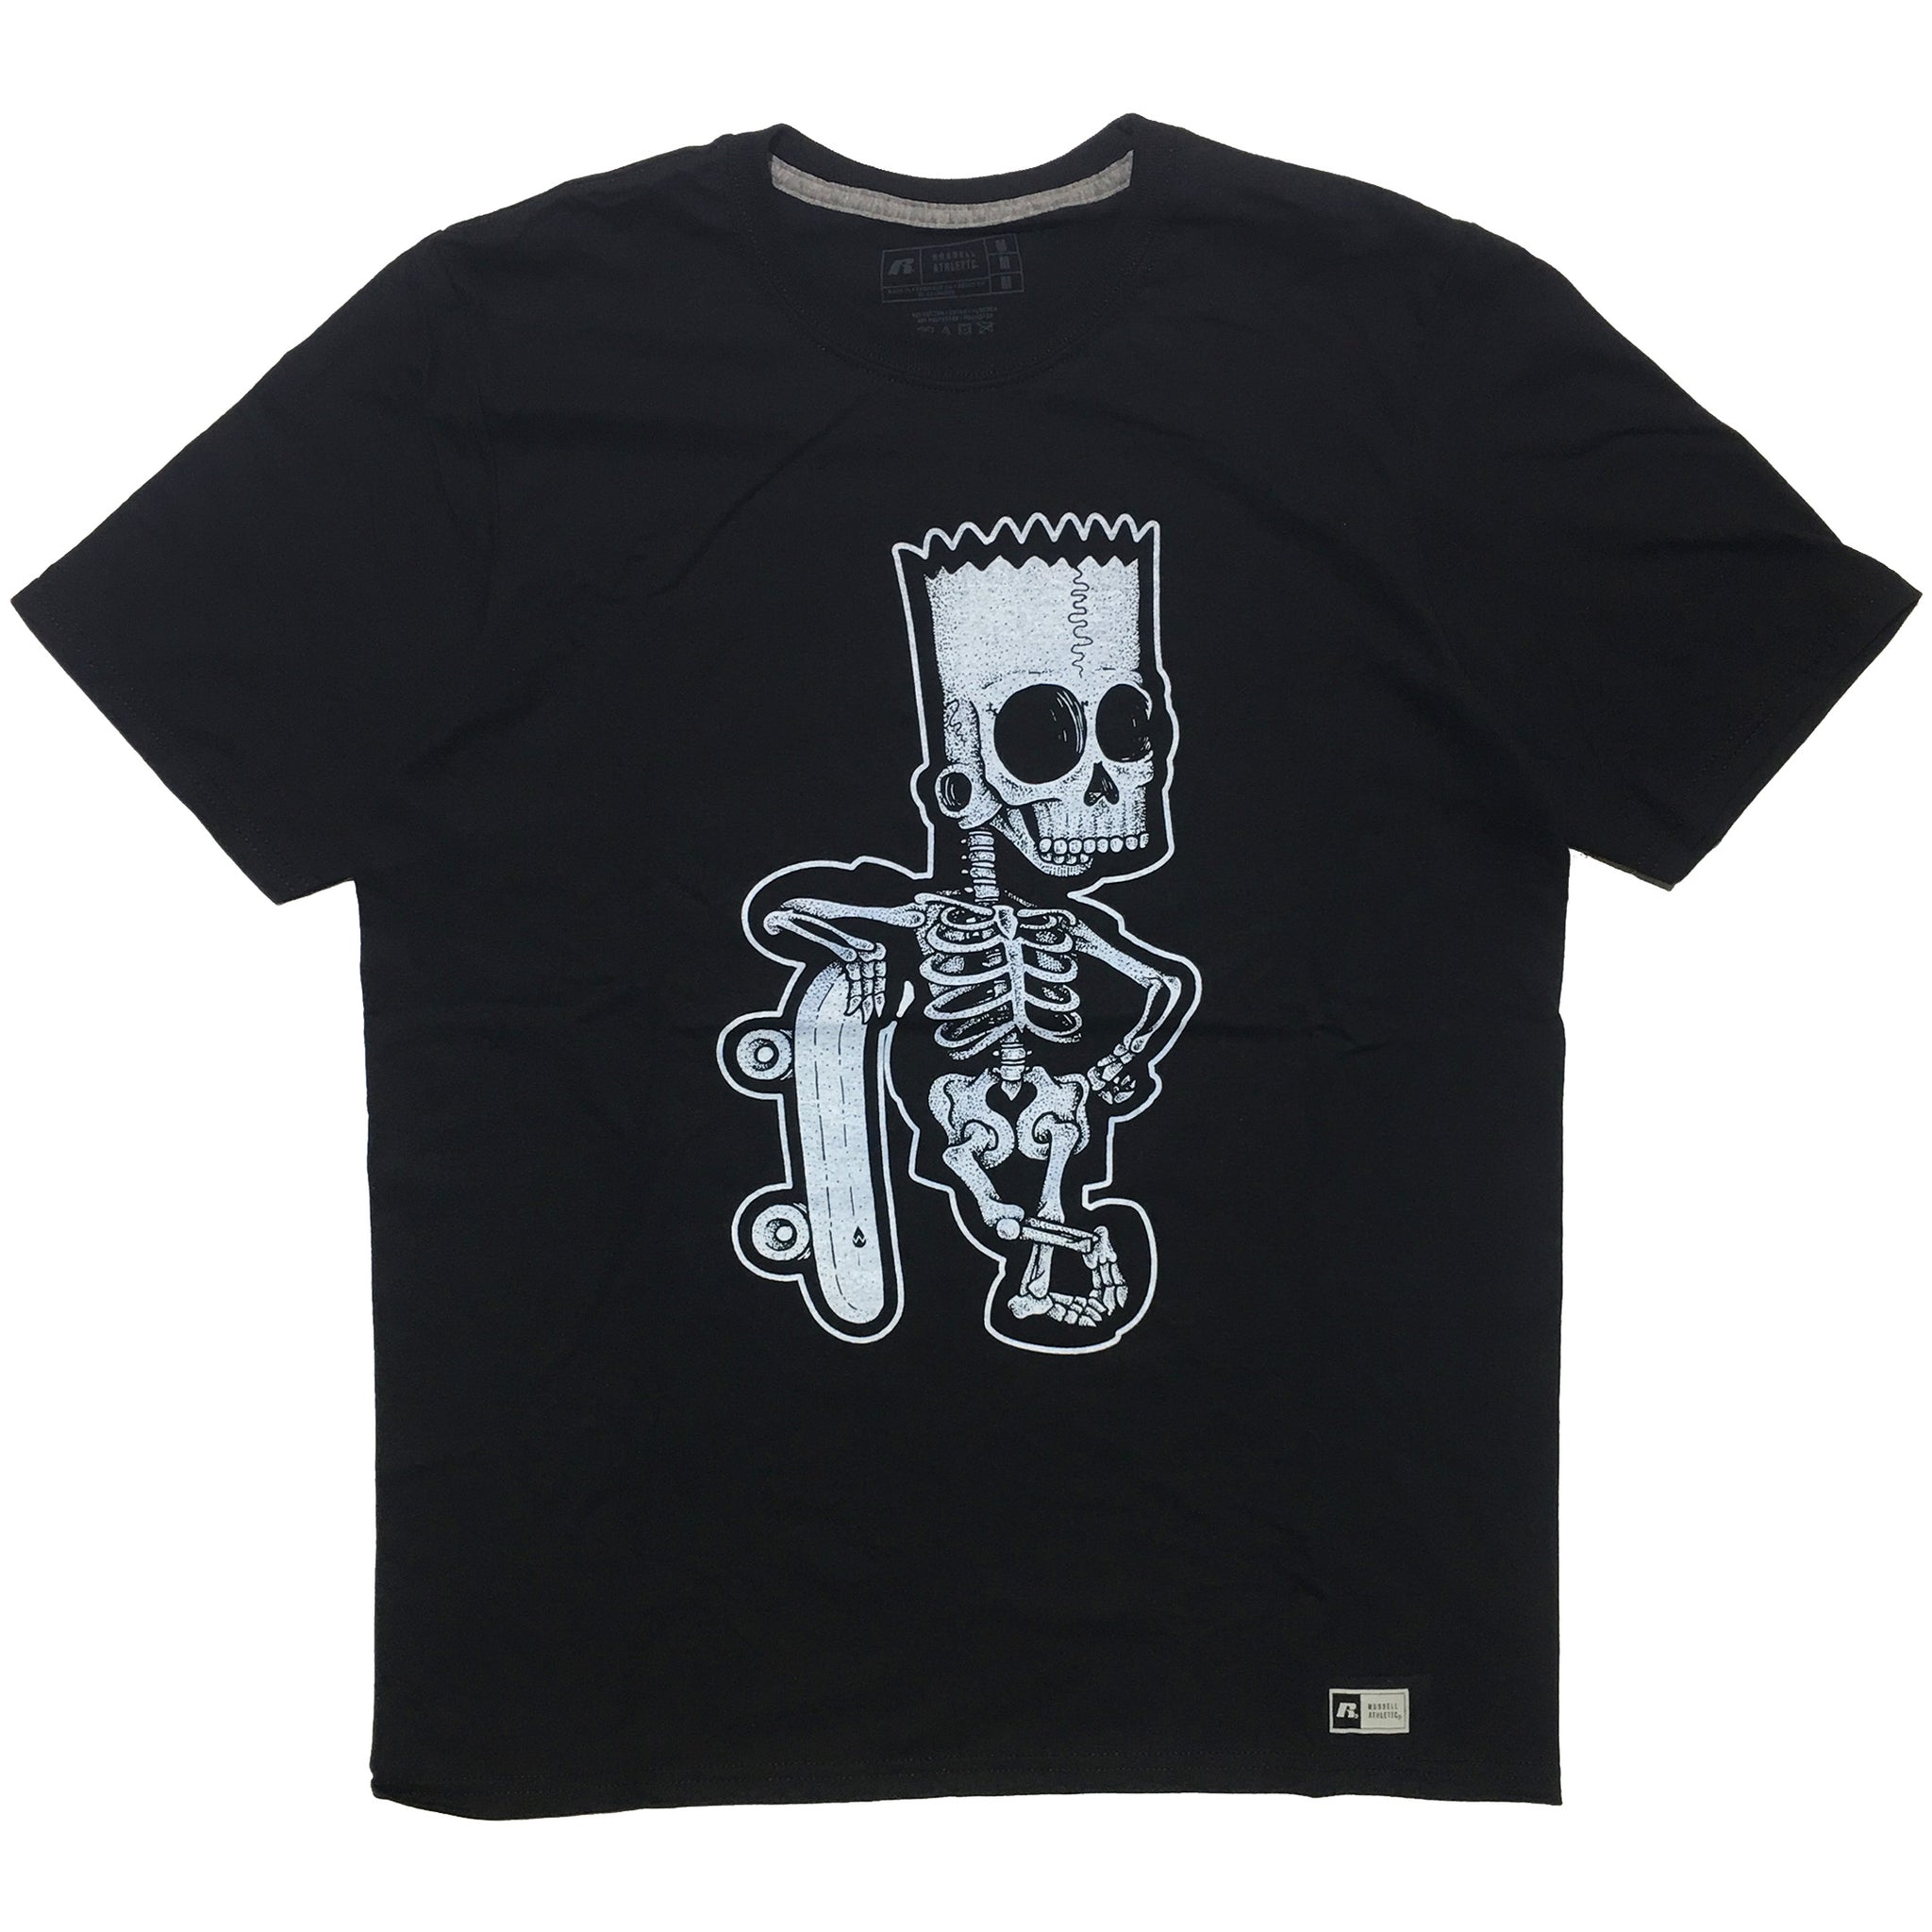 "Bare Bones Bart" Tee by Will Blood